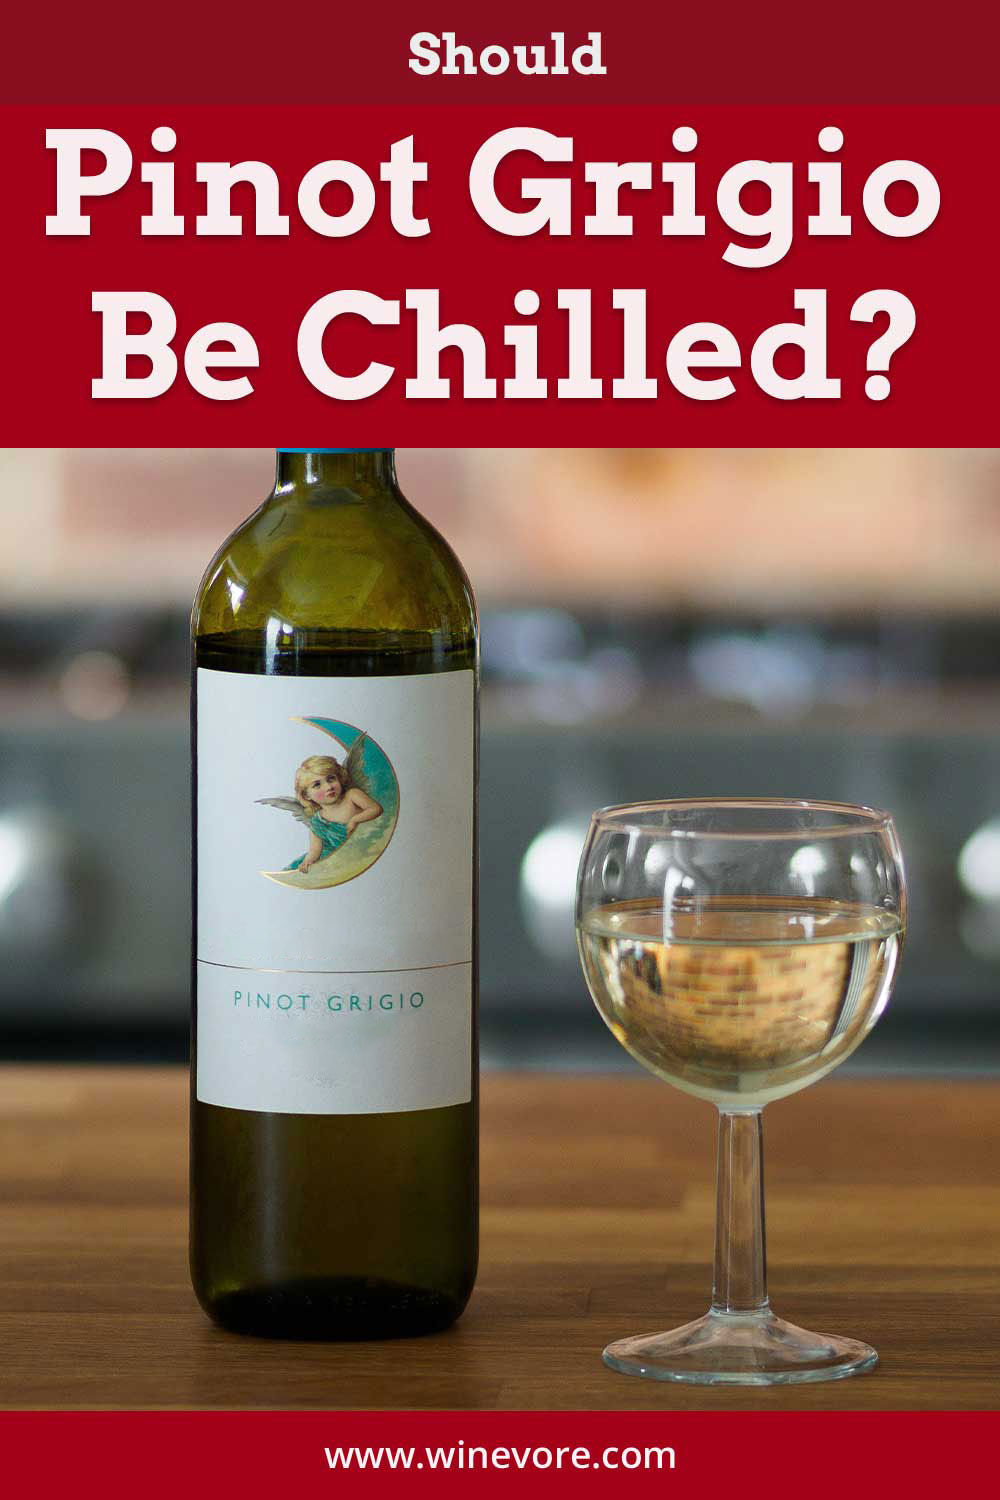 A bottle of Pinot Grigio and a wine glass on a wooden surface - Should it Be Chilled?